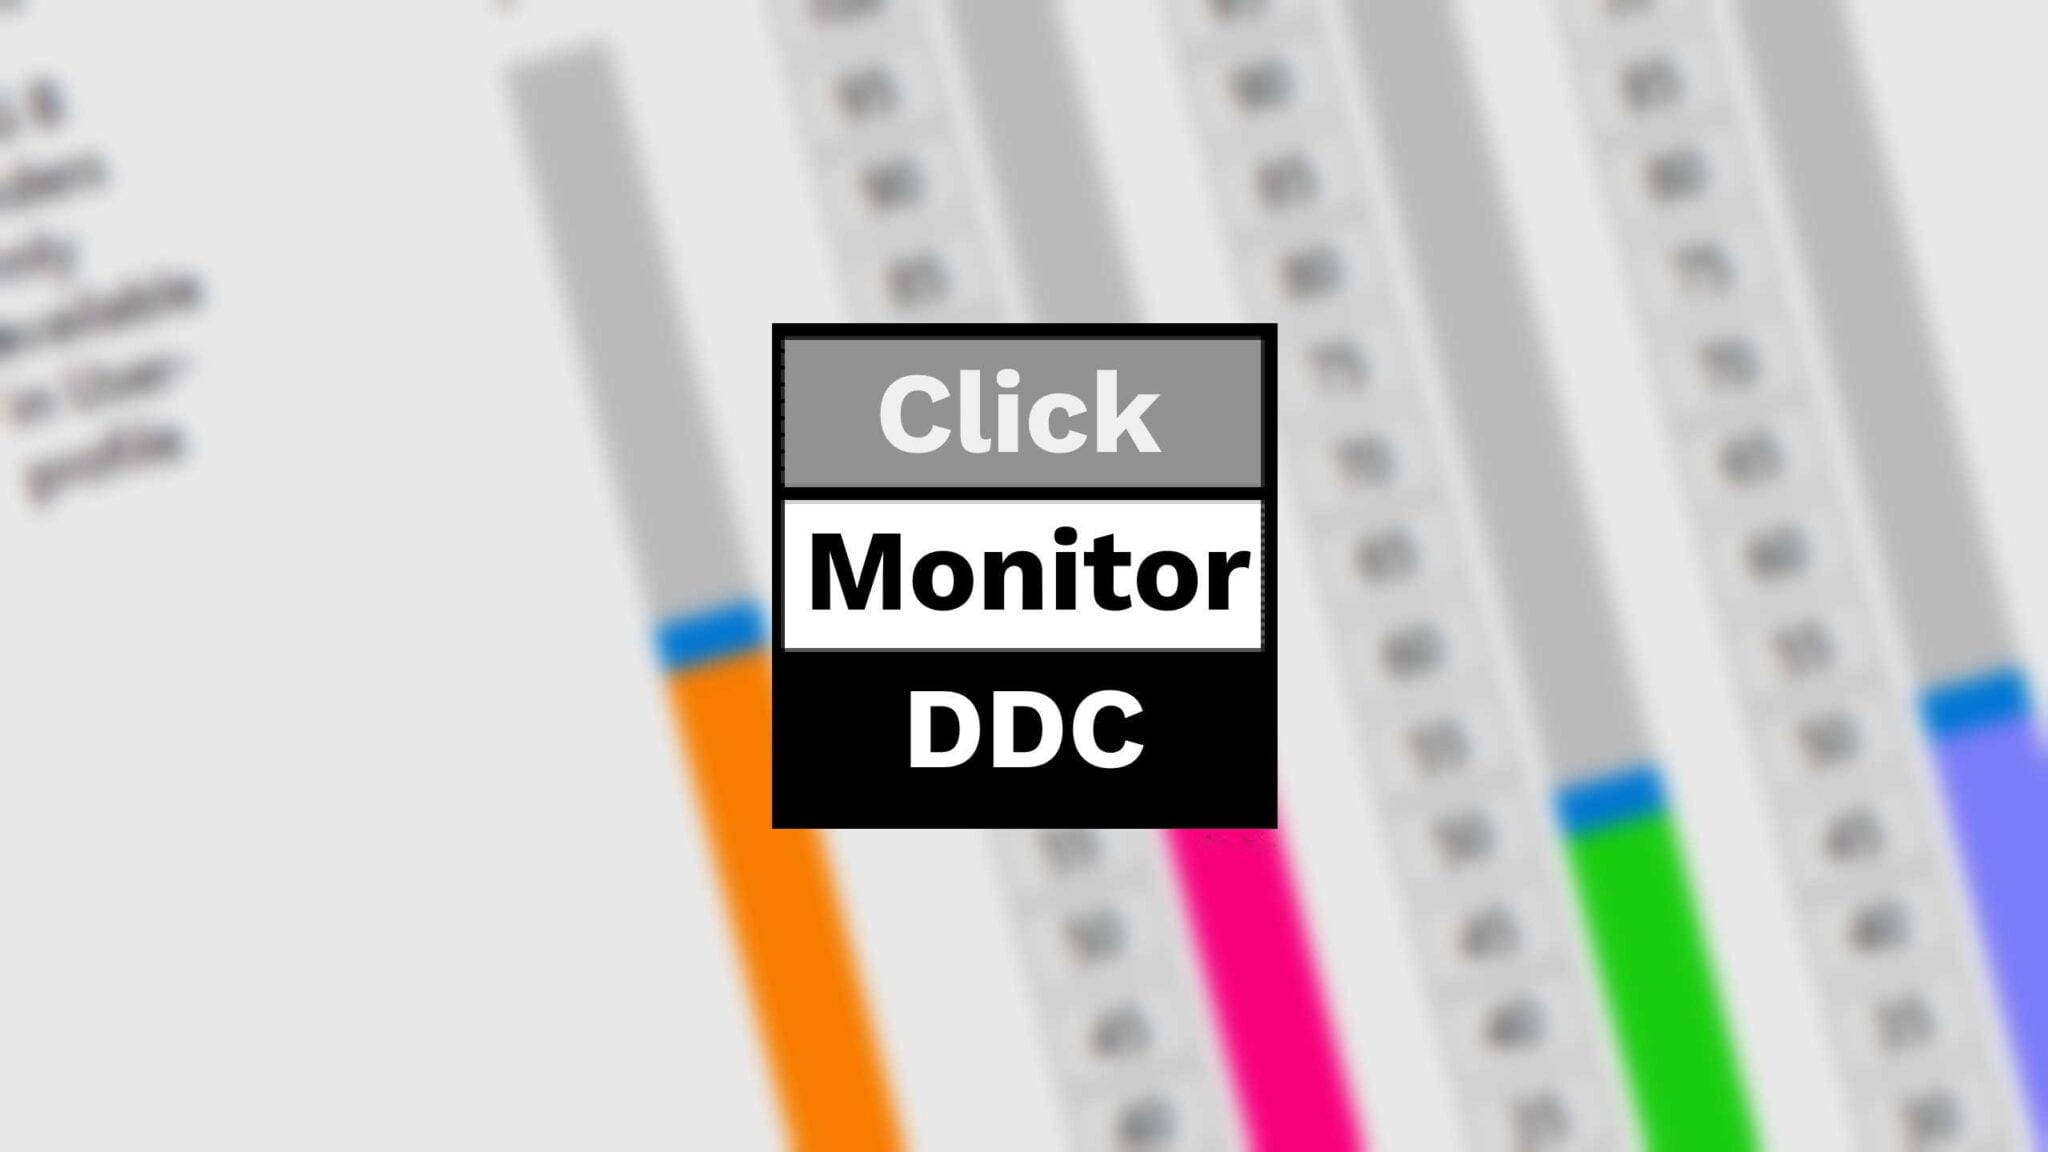 ClickMonitorDDC – change monitor brightness and colors in Windows